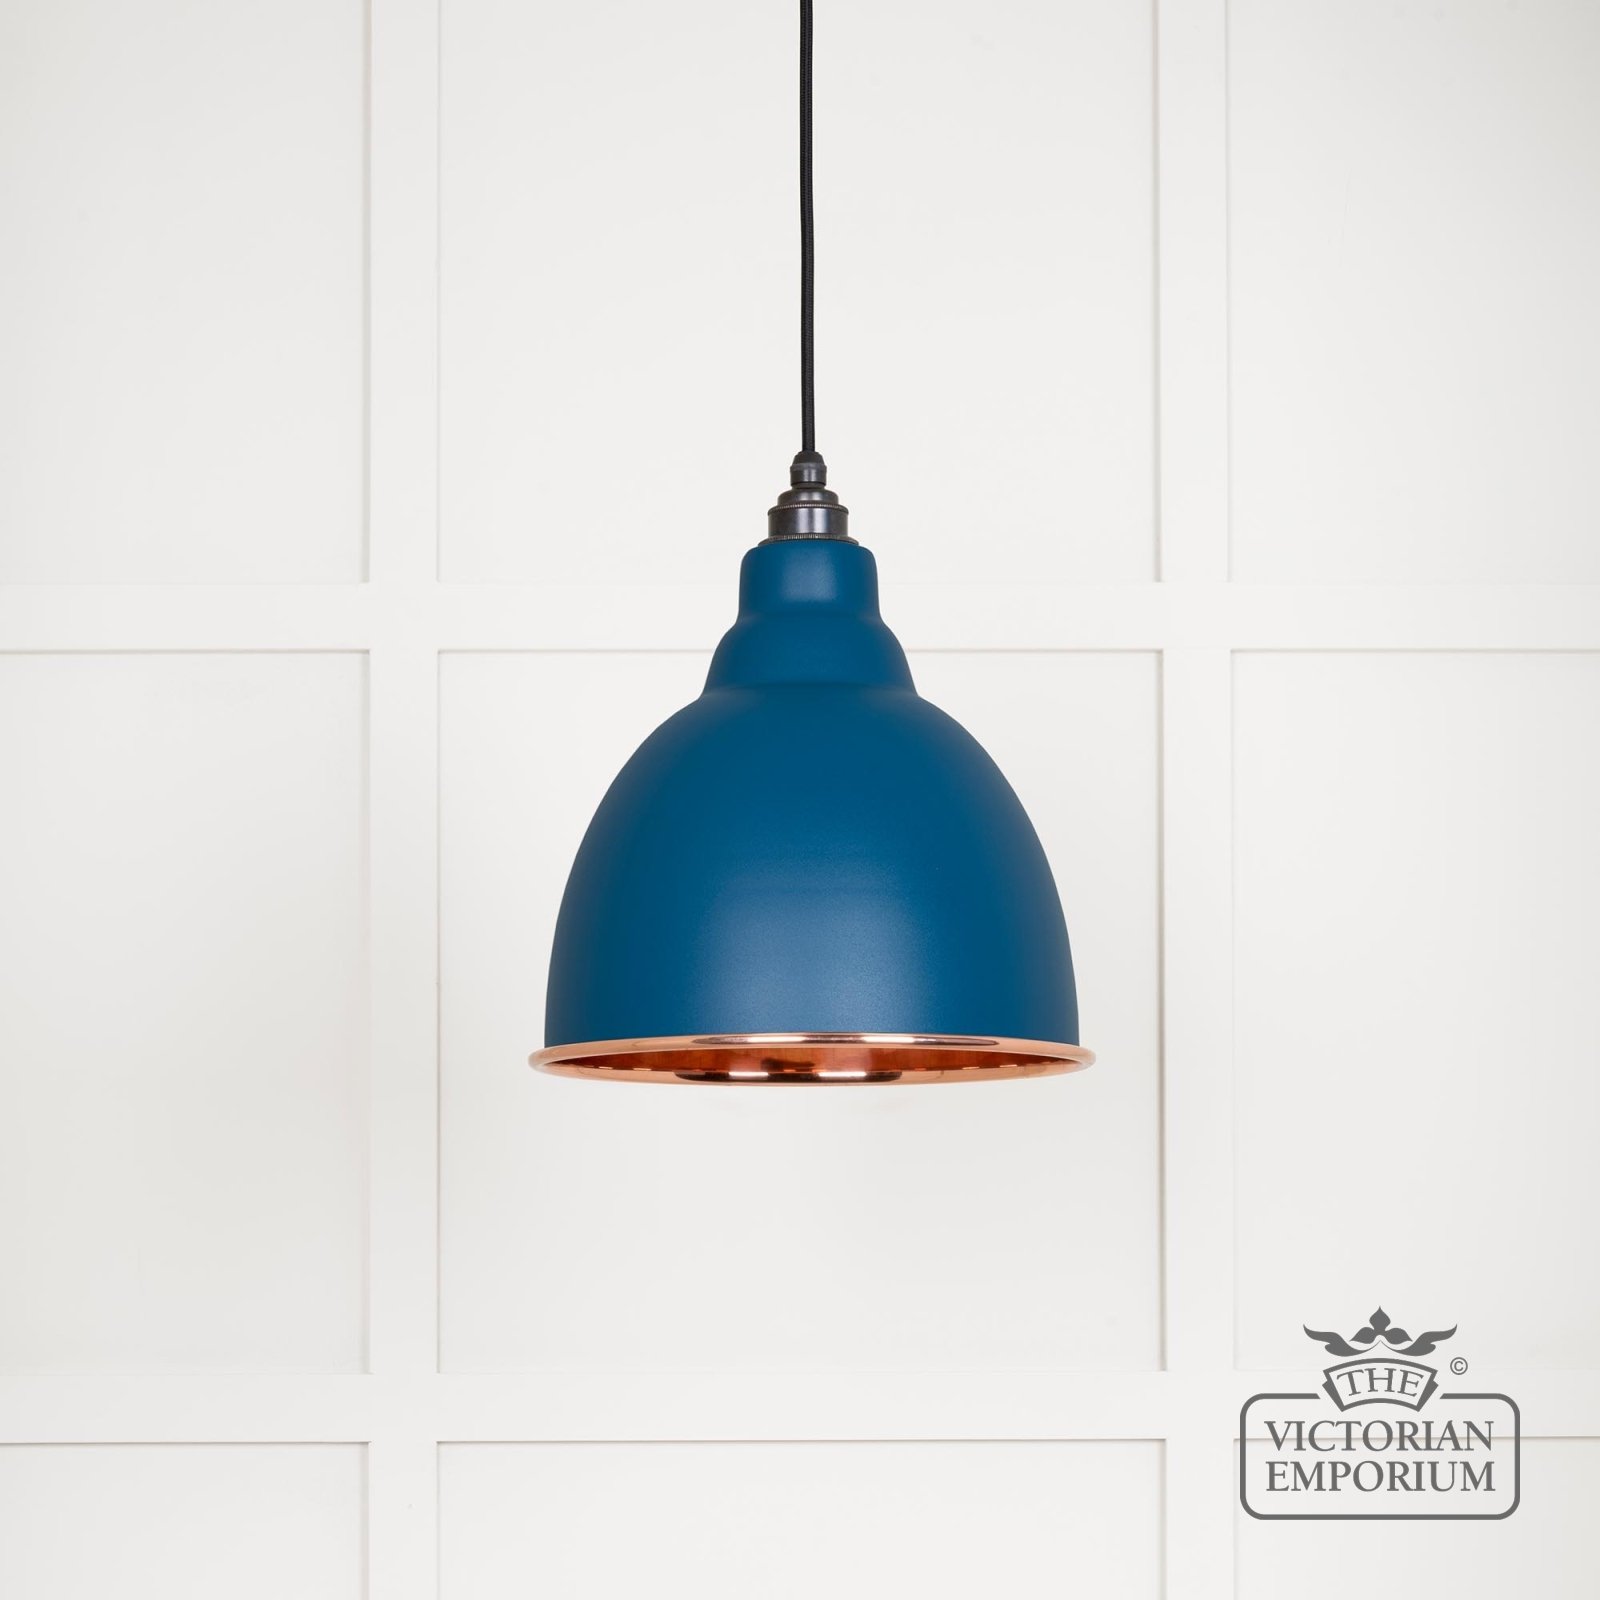 Brindle Pendant Light in Smooth Copper with Upstream Exterior